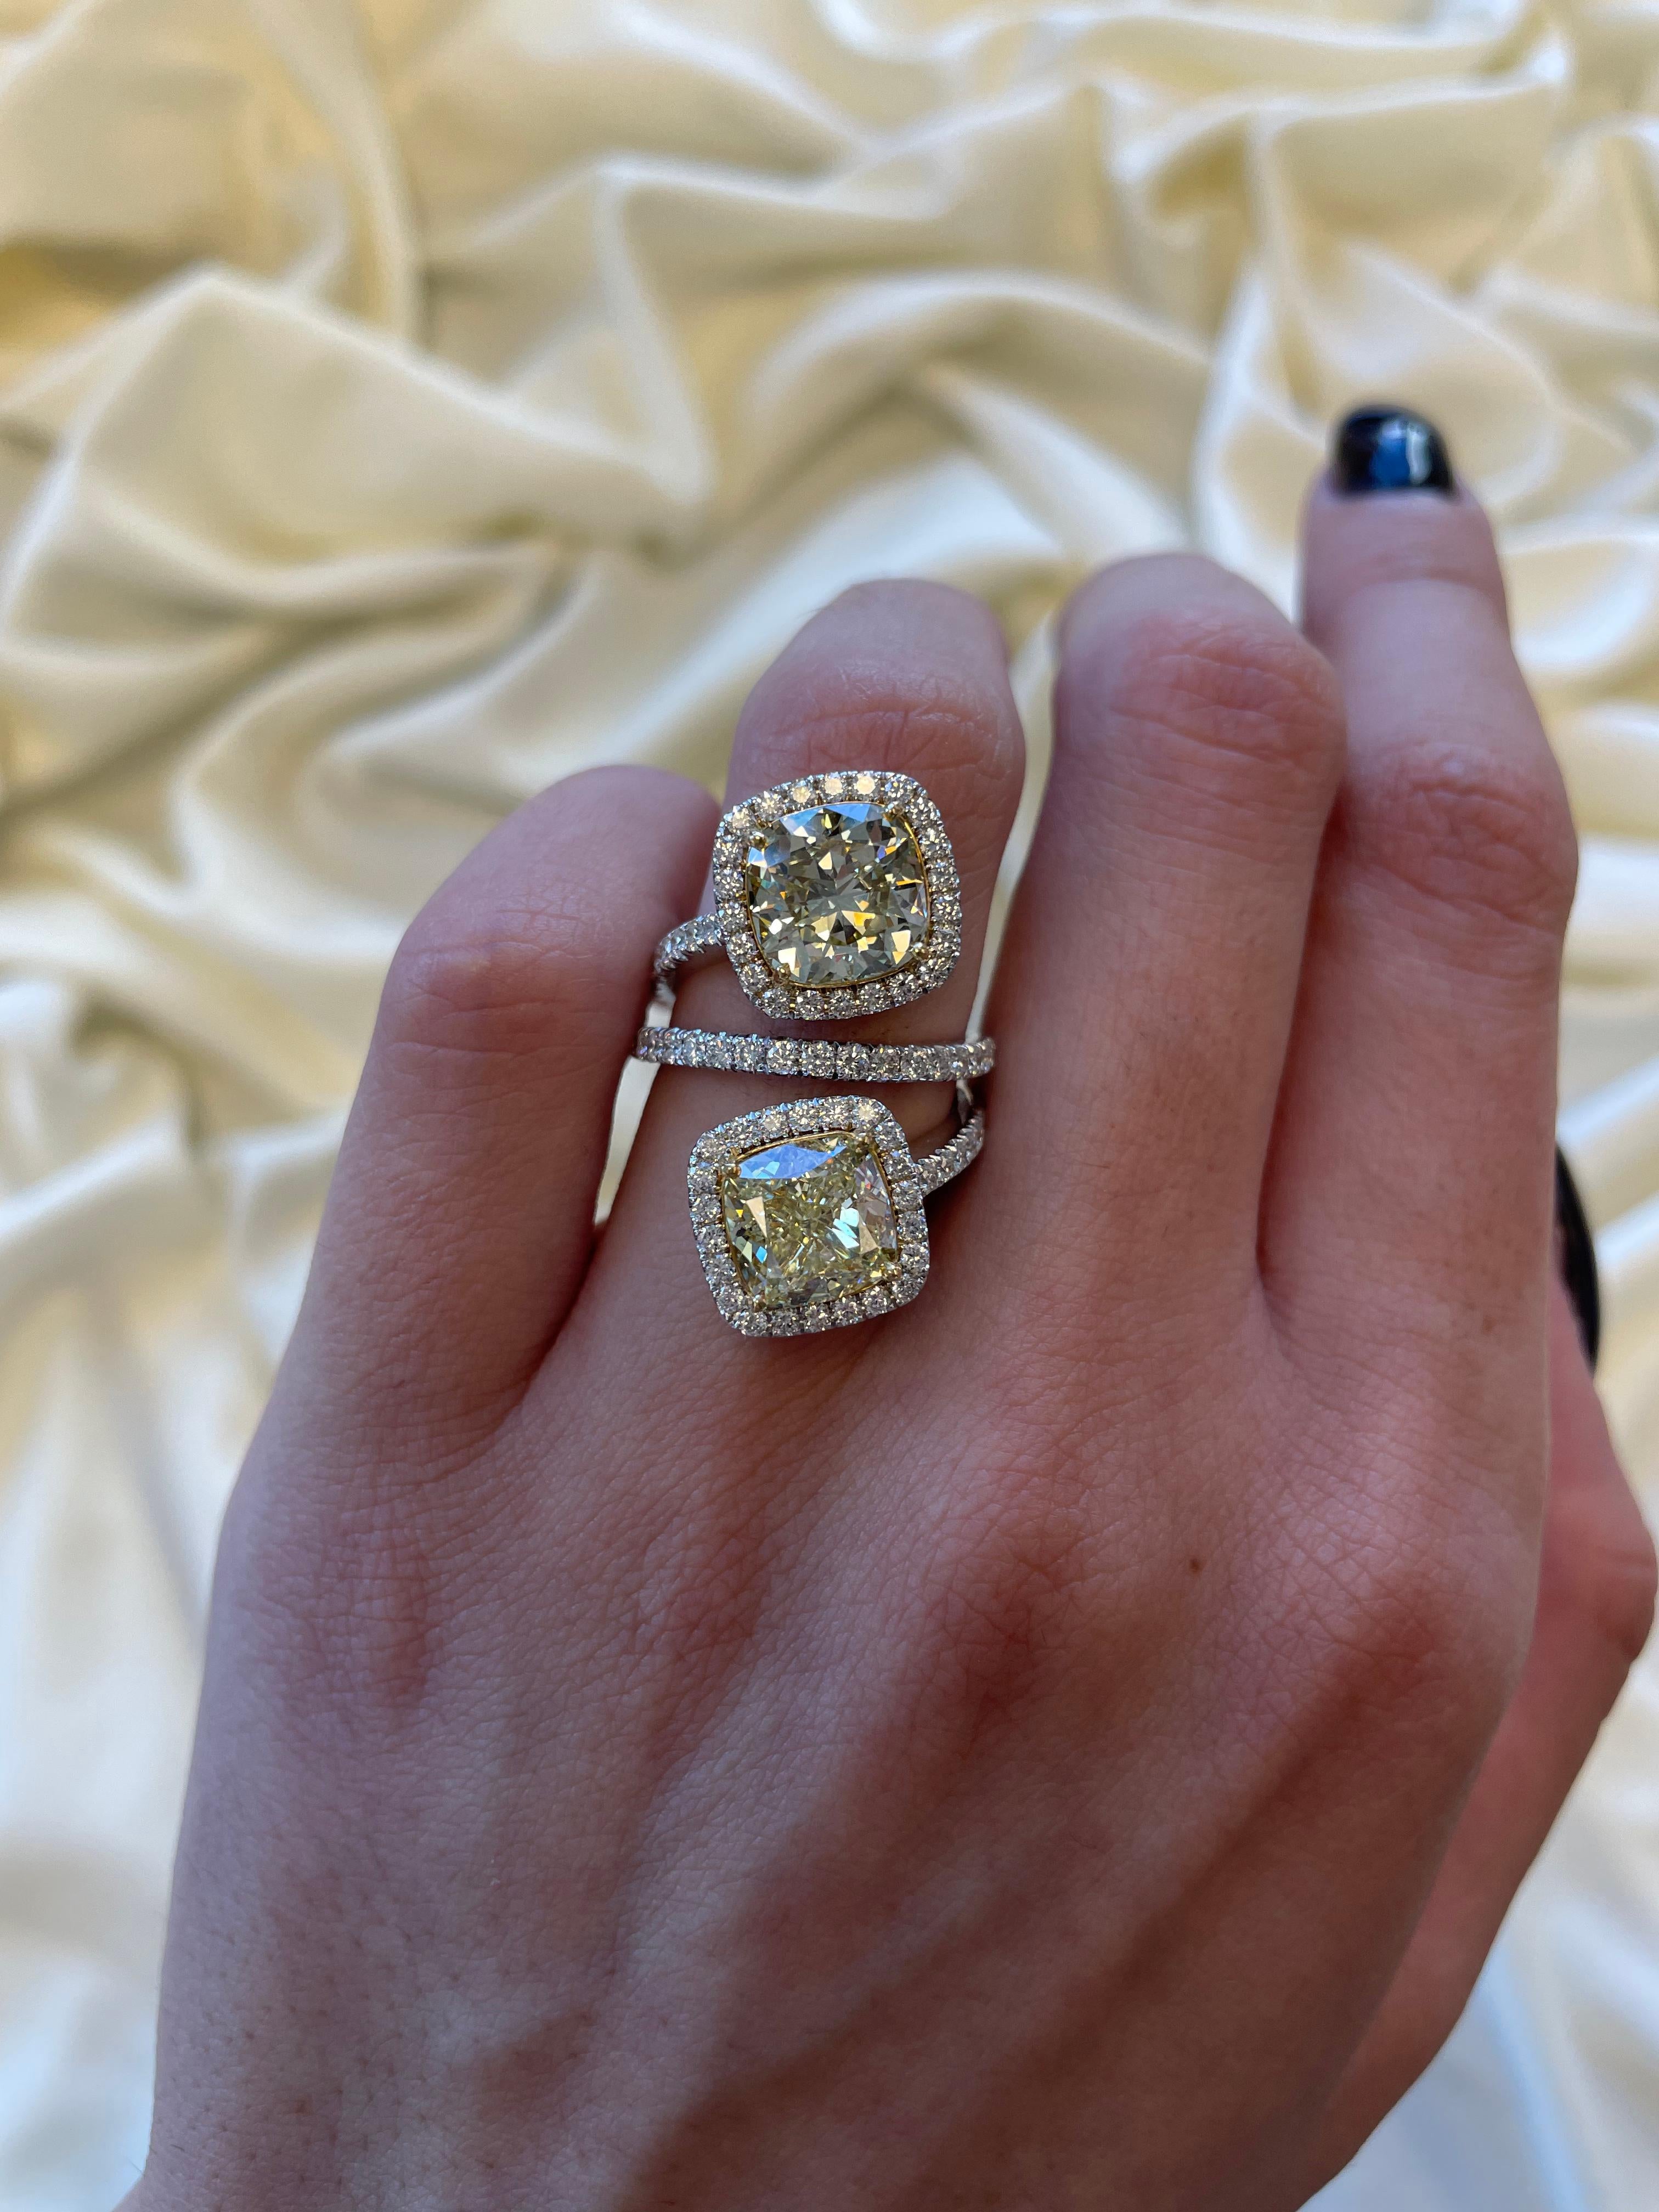 Stunning modern floating diamond bypass toi et moi ring, both stones GIA certified. High jewelry Alexander Beverly Hills.
7.52 carats total diamond weight.
2 cushion diamonds, 6.12 carats. One stone Fancy Yellow color and VS2 clarity, the other